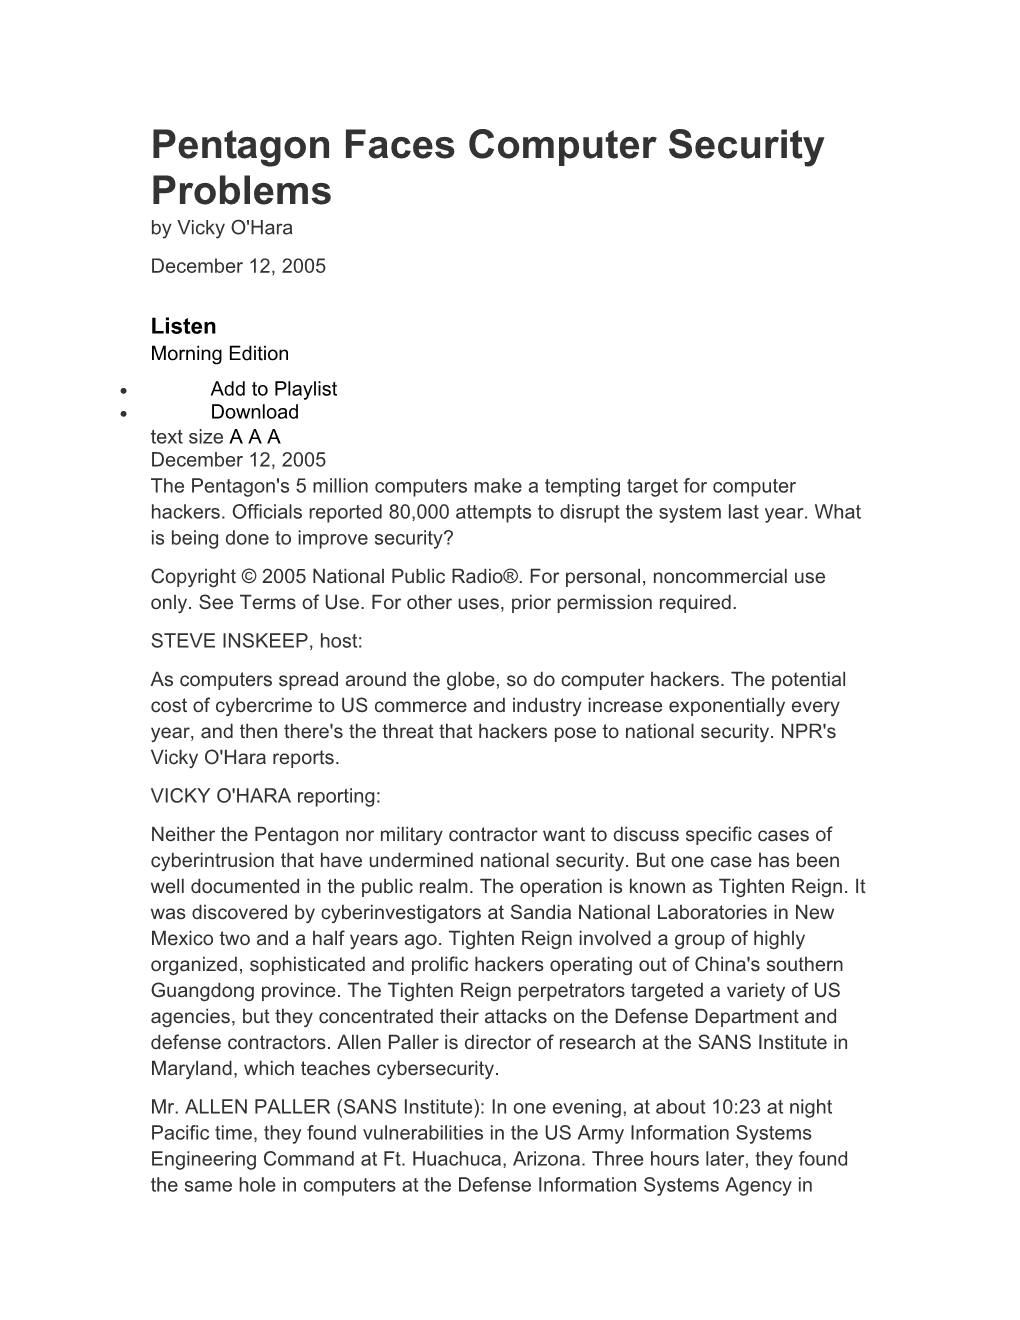 Pentagon Faces Computer Security Problems by Vicky O'hara December 12, 2005